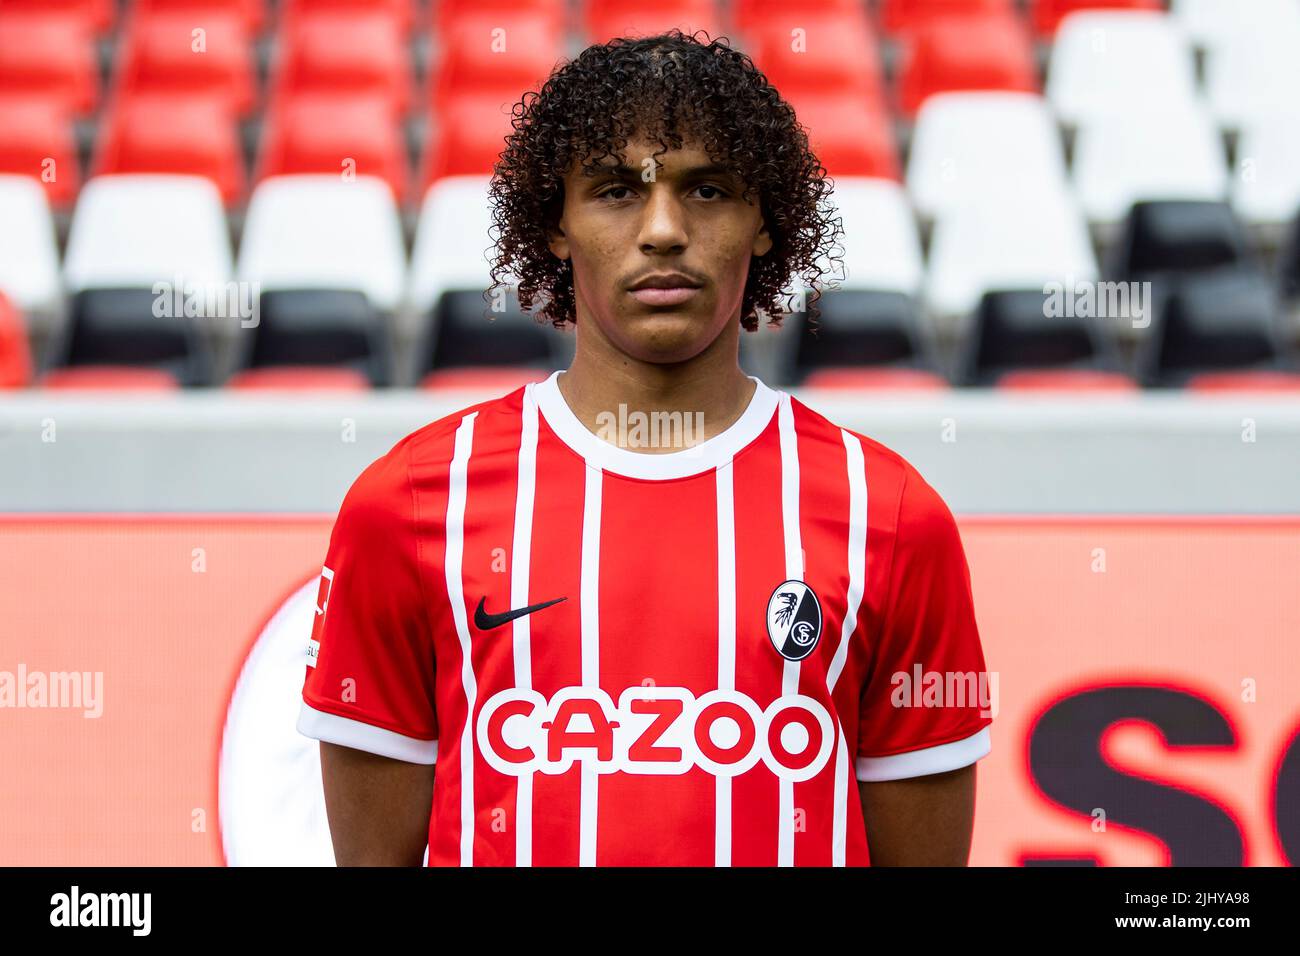 Freiburg, Germany. 20th July, 2022. Soccer, 1. Bundesliga, SC Freiburg, photo opportunity (in home jersey) for the 2022/23 season: Kiliann Sildillia. Credit: Tom Weller/dpa - IMPORTANT NOTE: In accordance with the requirements of the DFL Deutsche Fußball Liga and the DFB Deutscher Fußball-Bund, it is prohibited to use or have used photographs taken in the stadium and/or of the match in the form of sequence pictures and/or video-like photo series./dpa/Alamy Live News Stock Photo